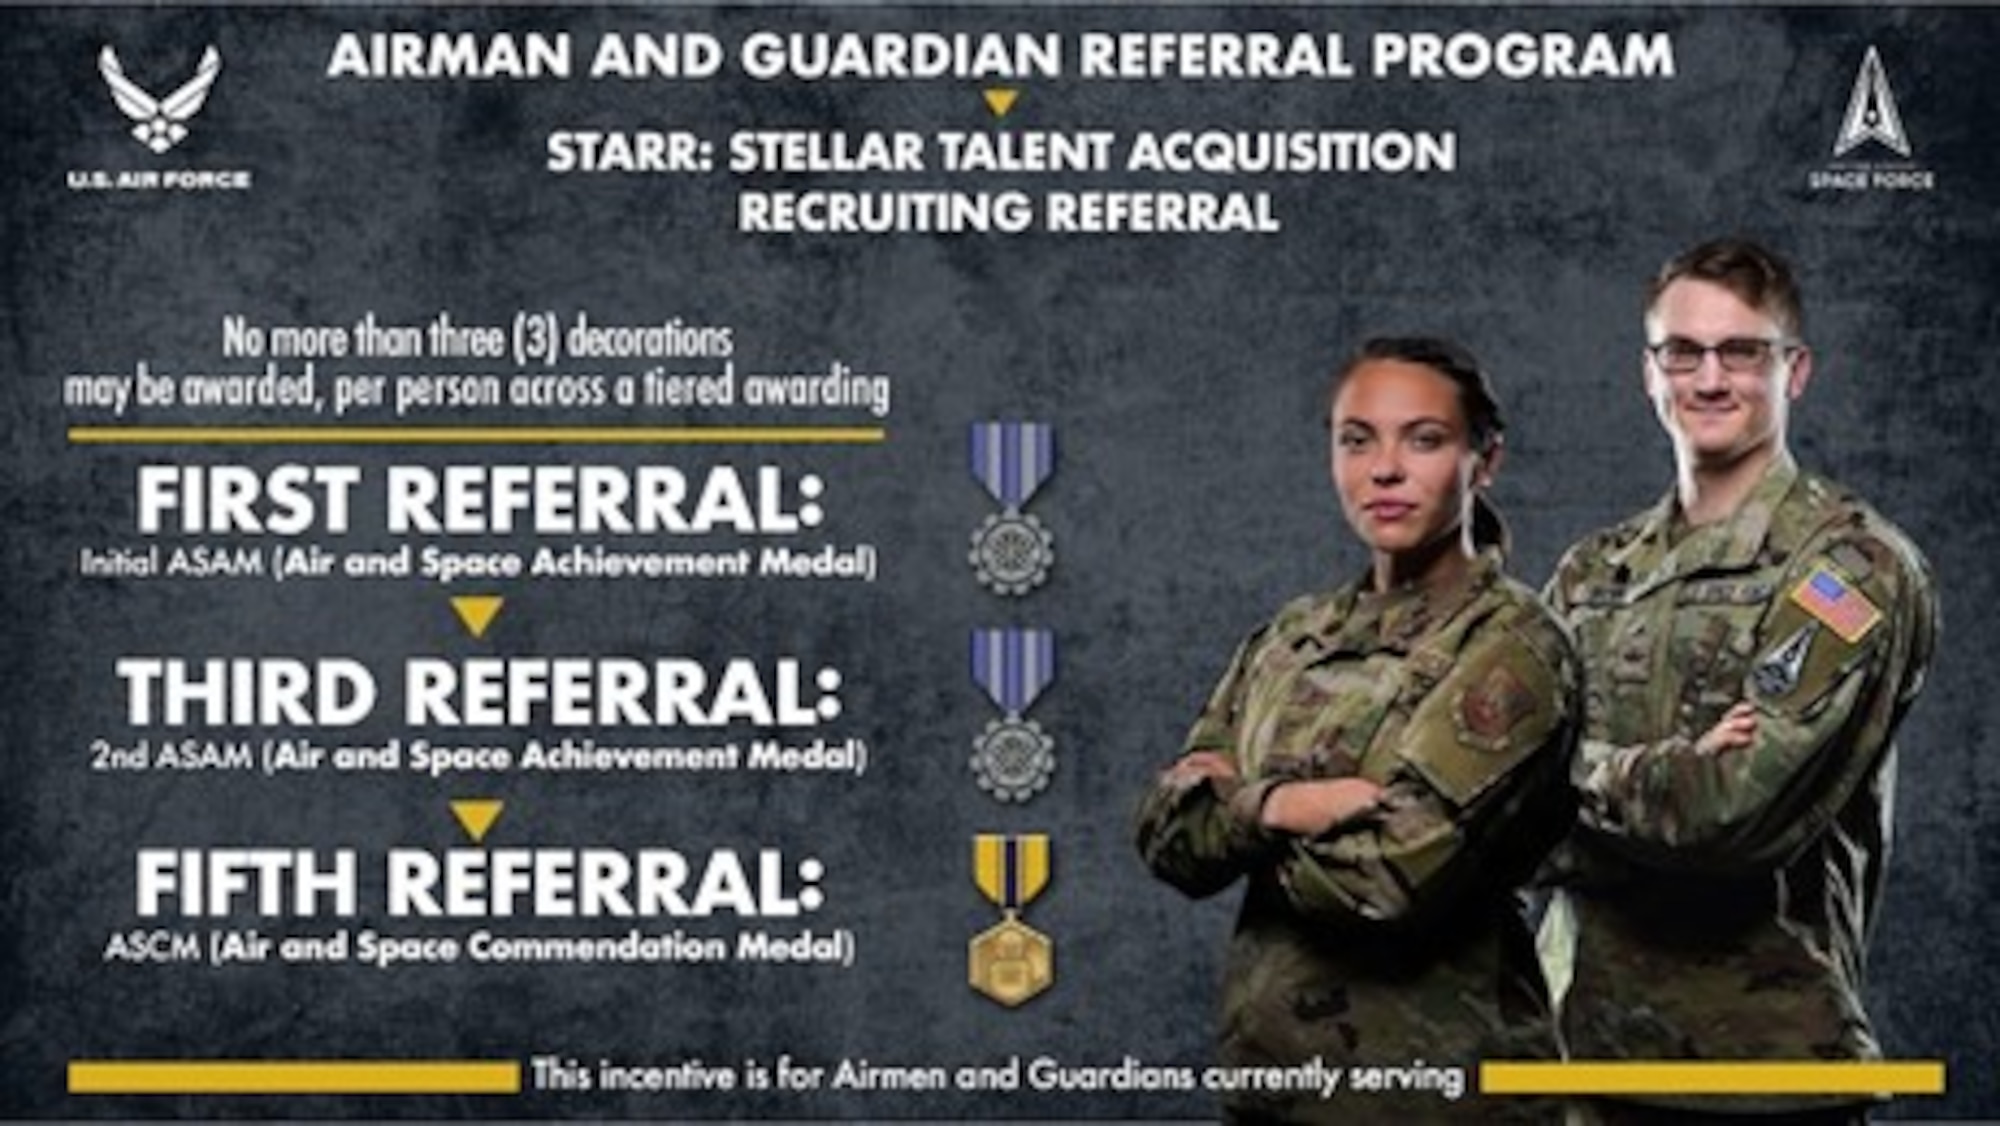 A Hurlburt Field personalist is the first Airman to earned an achievement medal under the Stellar Talent Acquisition Recruiting Referral program for recommending a future Airman for service in the Air Force.